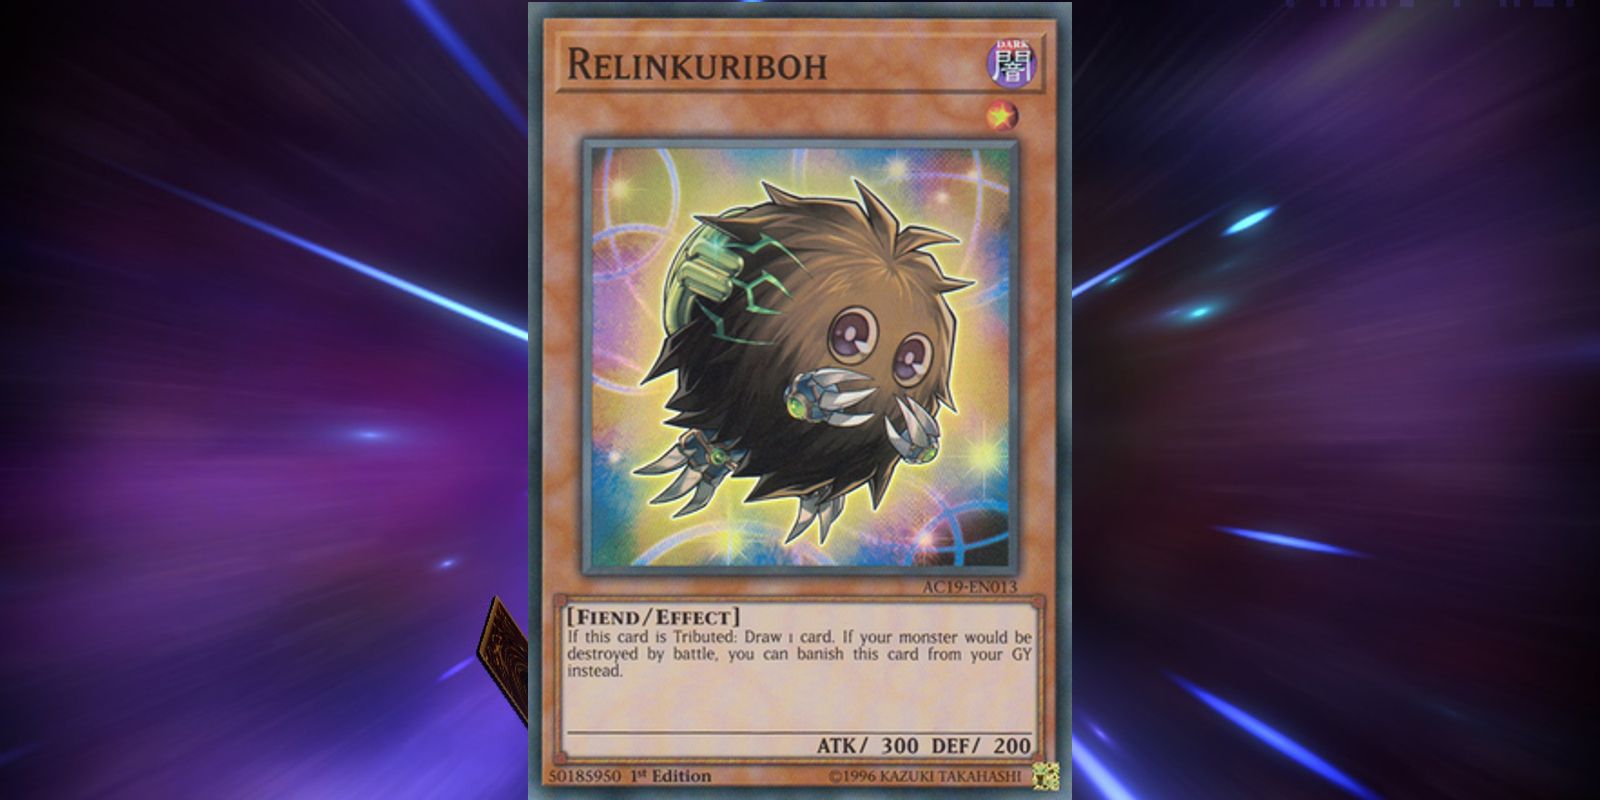 Relinkuriboh allows players to draw a card in Yu-Gi-Oh! Master Duel.